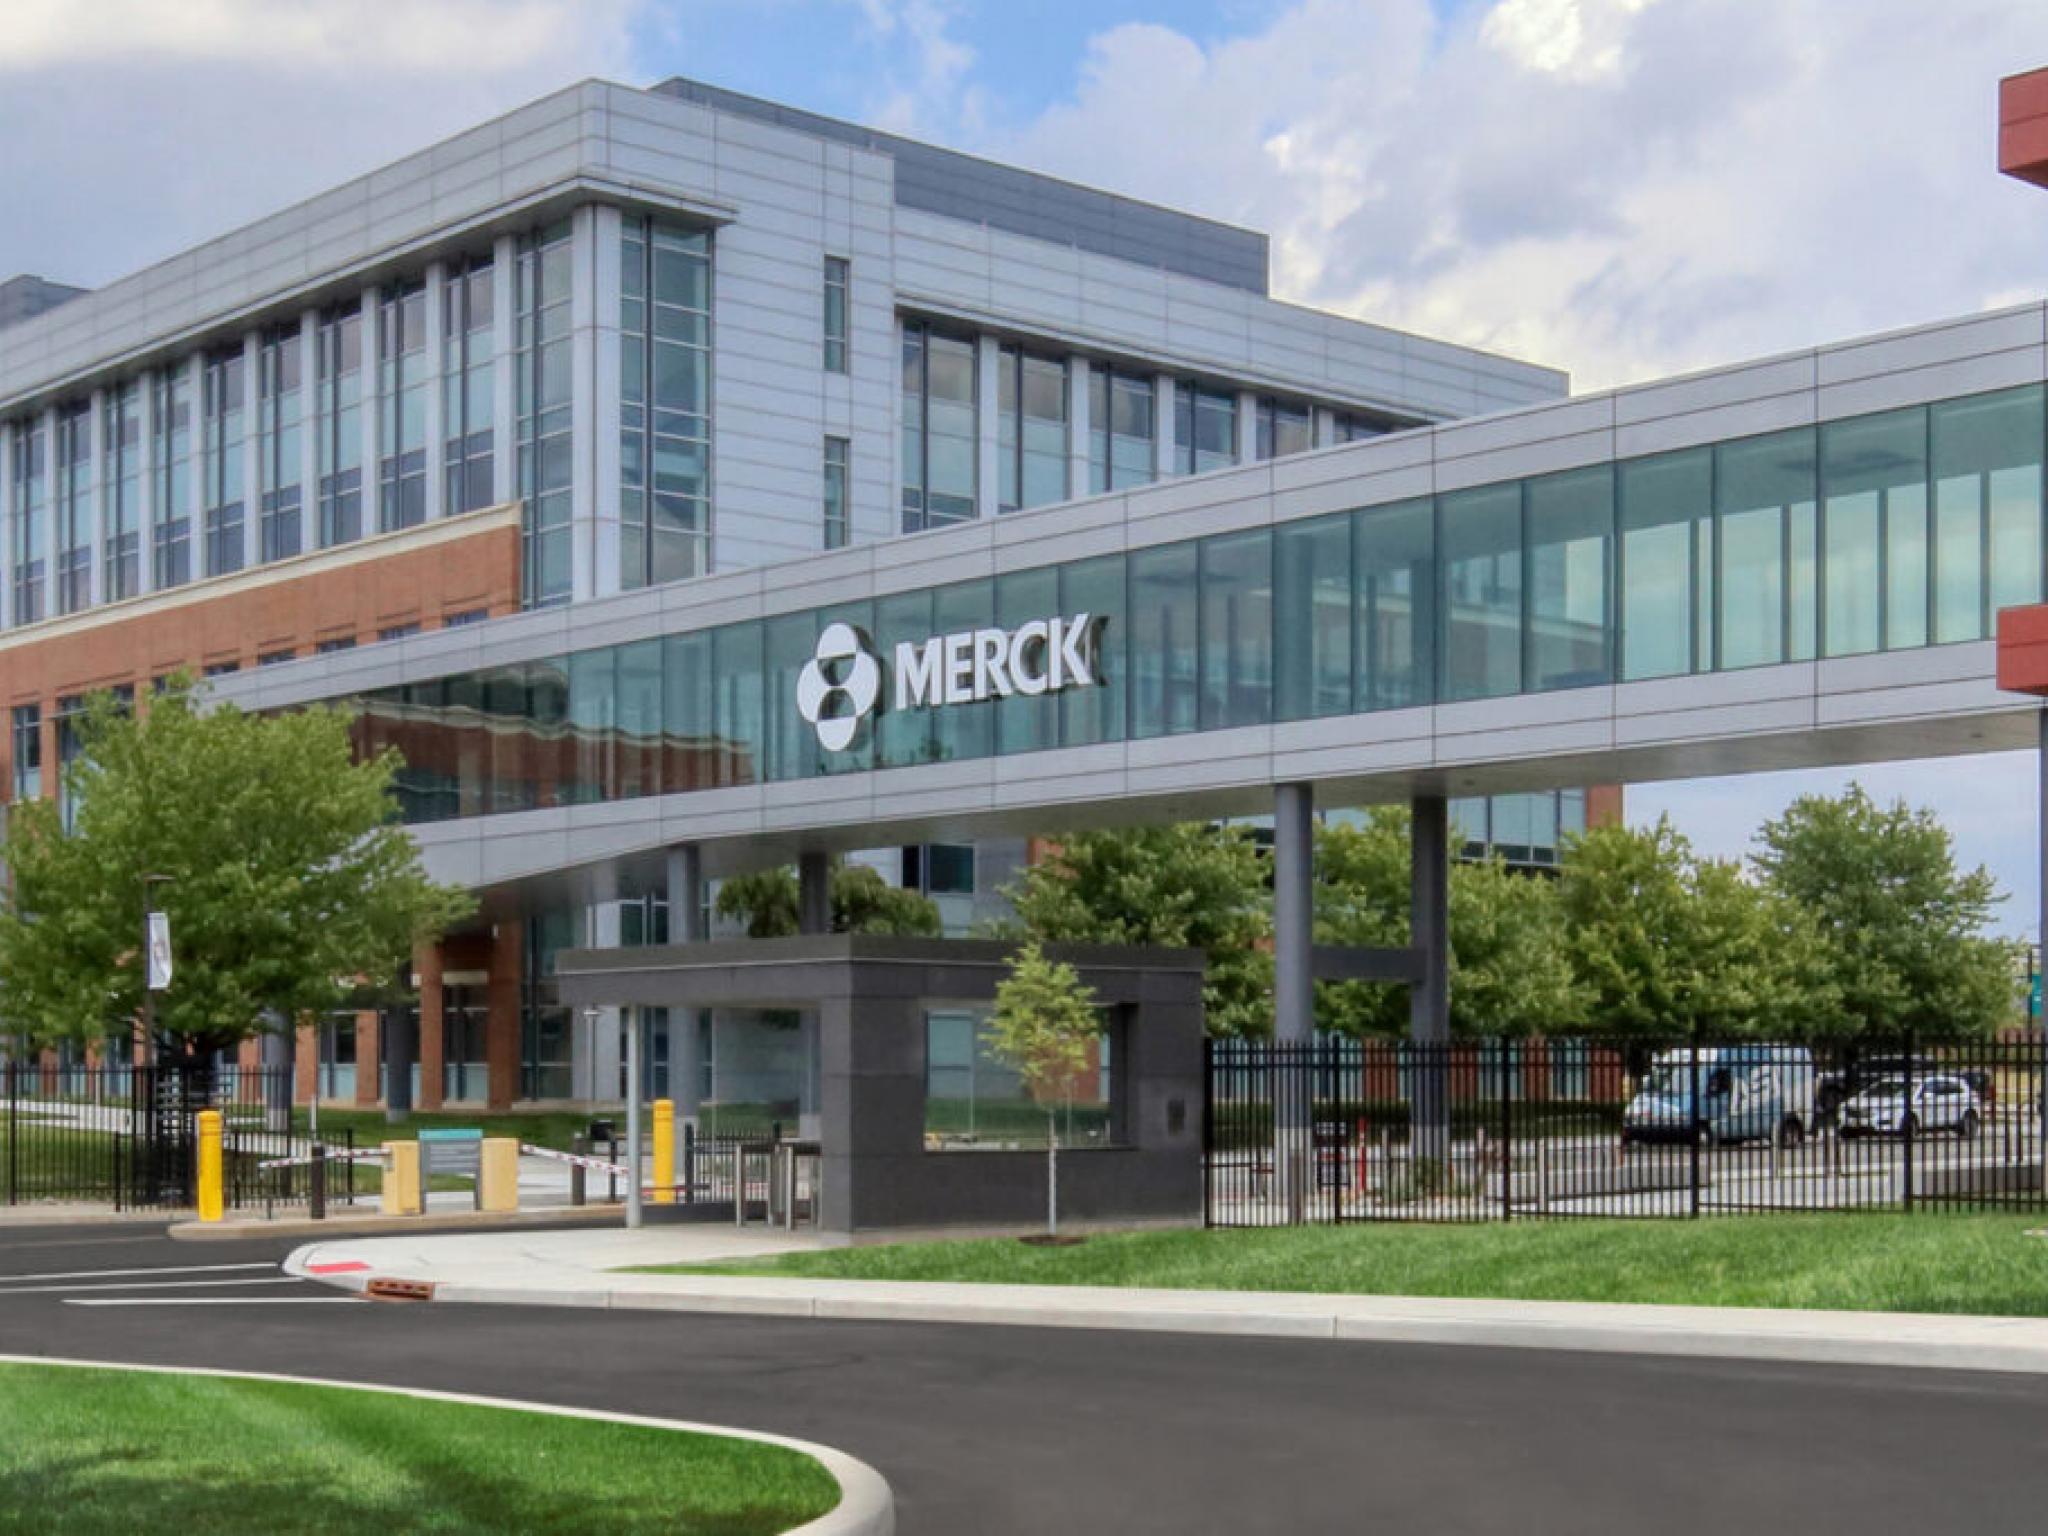  merck-analysts-slash-their-forecasts-after-q2-results 